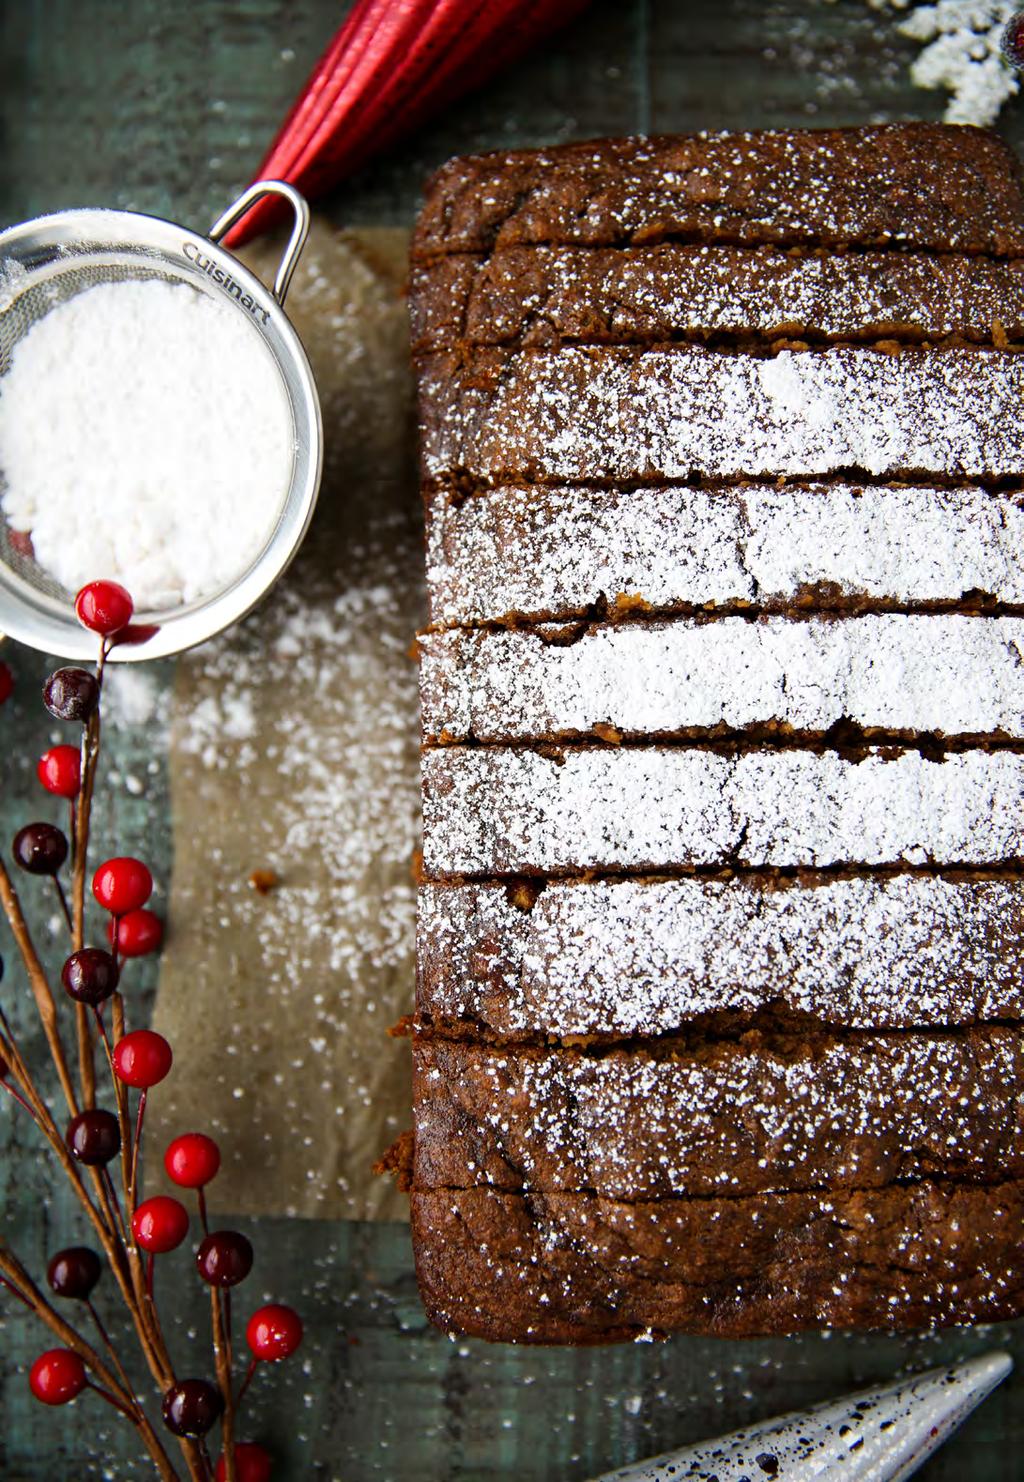 GINGERBREAD BANANA BREAD Ingredients 3 brown bananas, mashed 1/4 cup maple syrup 1/4 cup molasses 1 teaspoon vanilla extract 3 eggs 1/2 cup cashew butter (or other nut/seed butter) 1/4 cup coconut